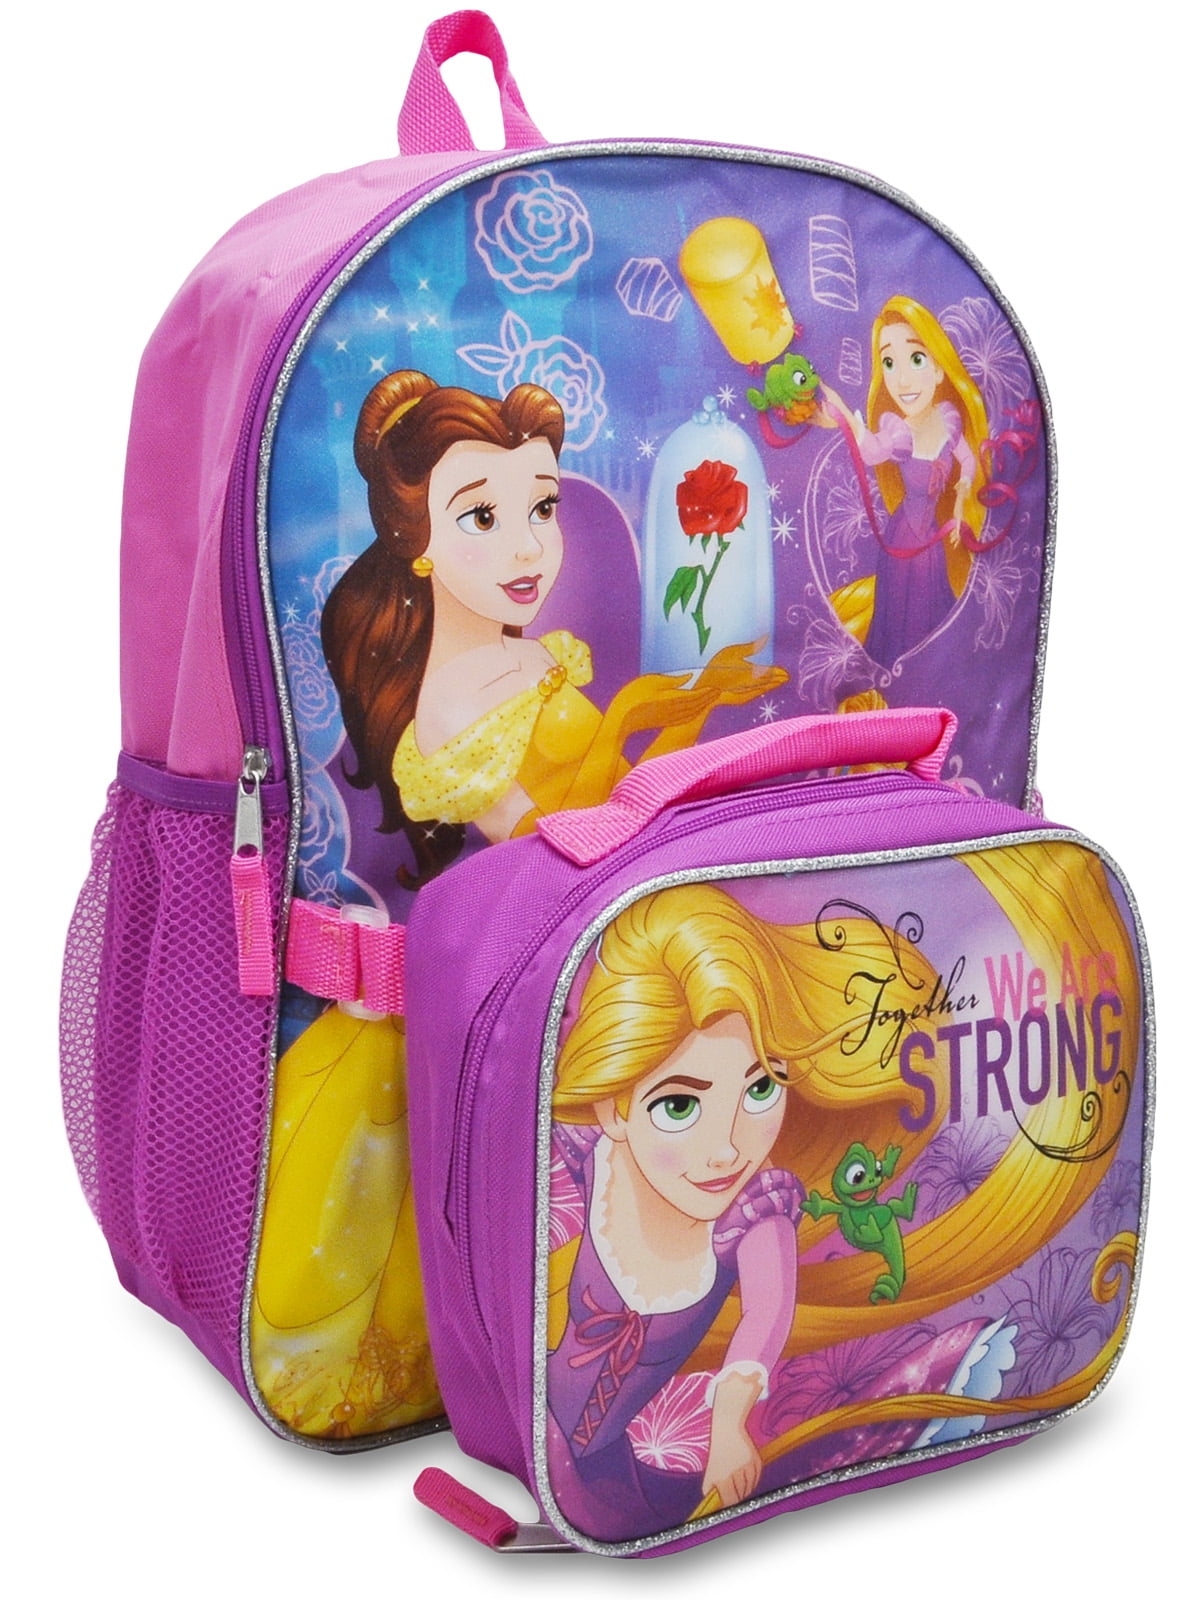 DISNEY Girls Princess Heart Strong Backpack 16 inches w Matching Lunch Bag. 